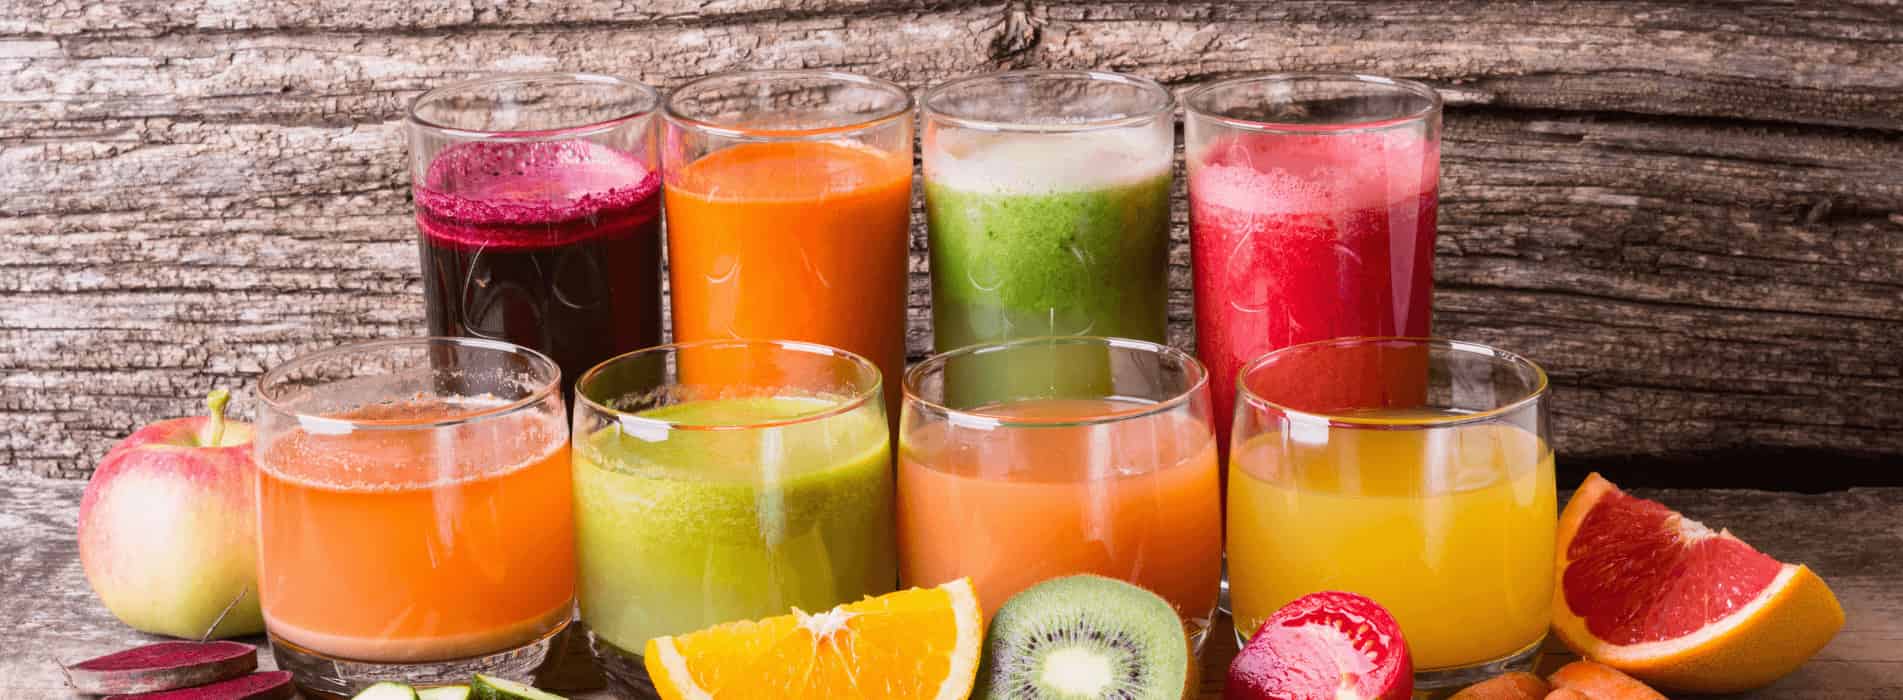 Beginners guide to juicing